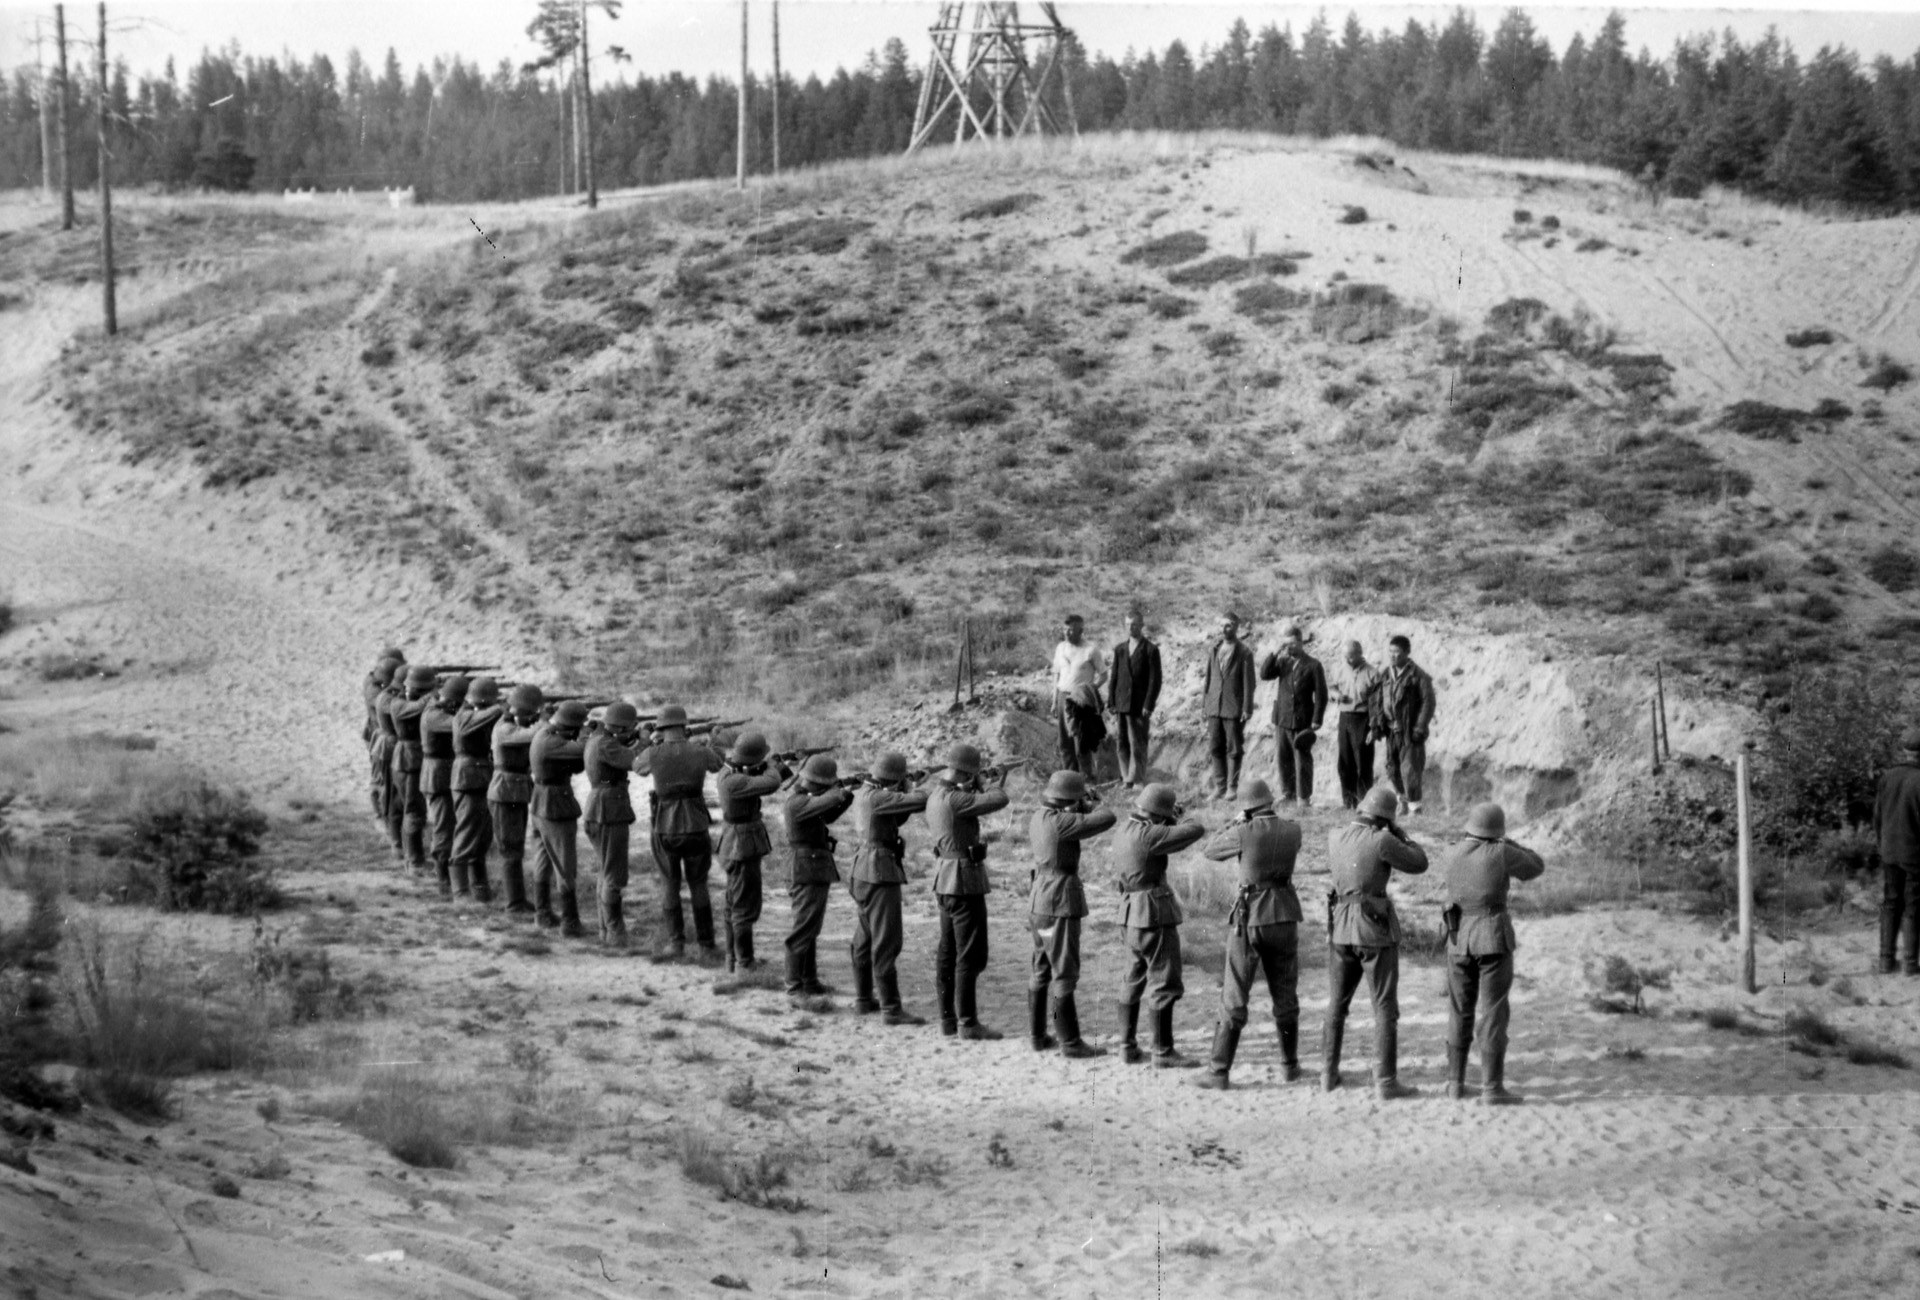 A Nazi firing squad executes six Soviet partisans “somewhere in the USSR,” September 1941.  German death squads (Einsatzgruppen) followed the frontline troops during the invasion of the Soviet Union, rounding up and killing hundreds of thousands of Jews and others.